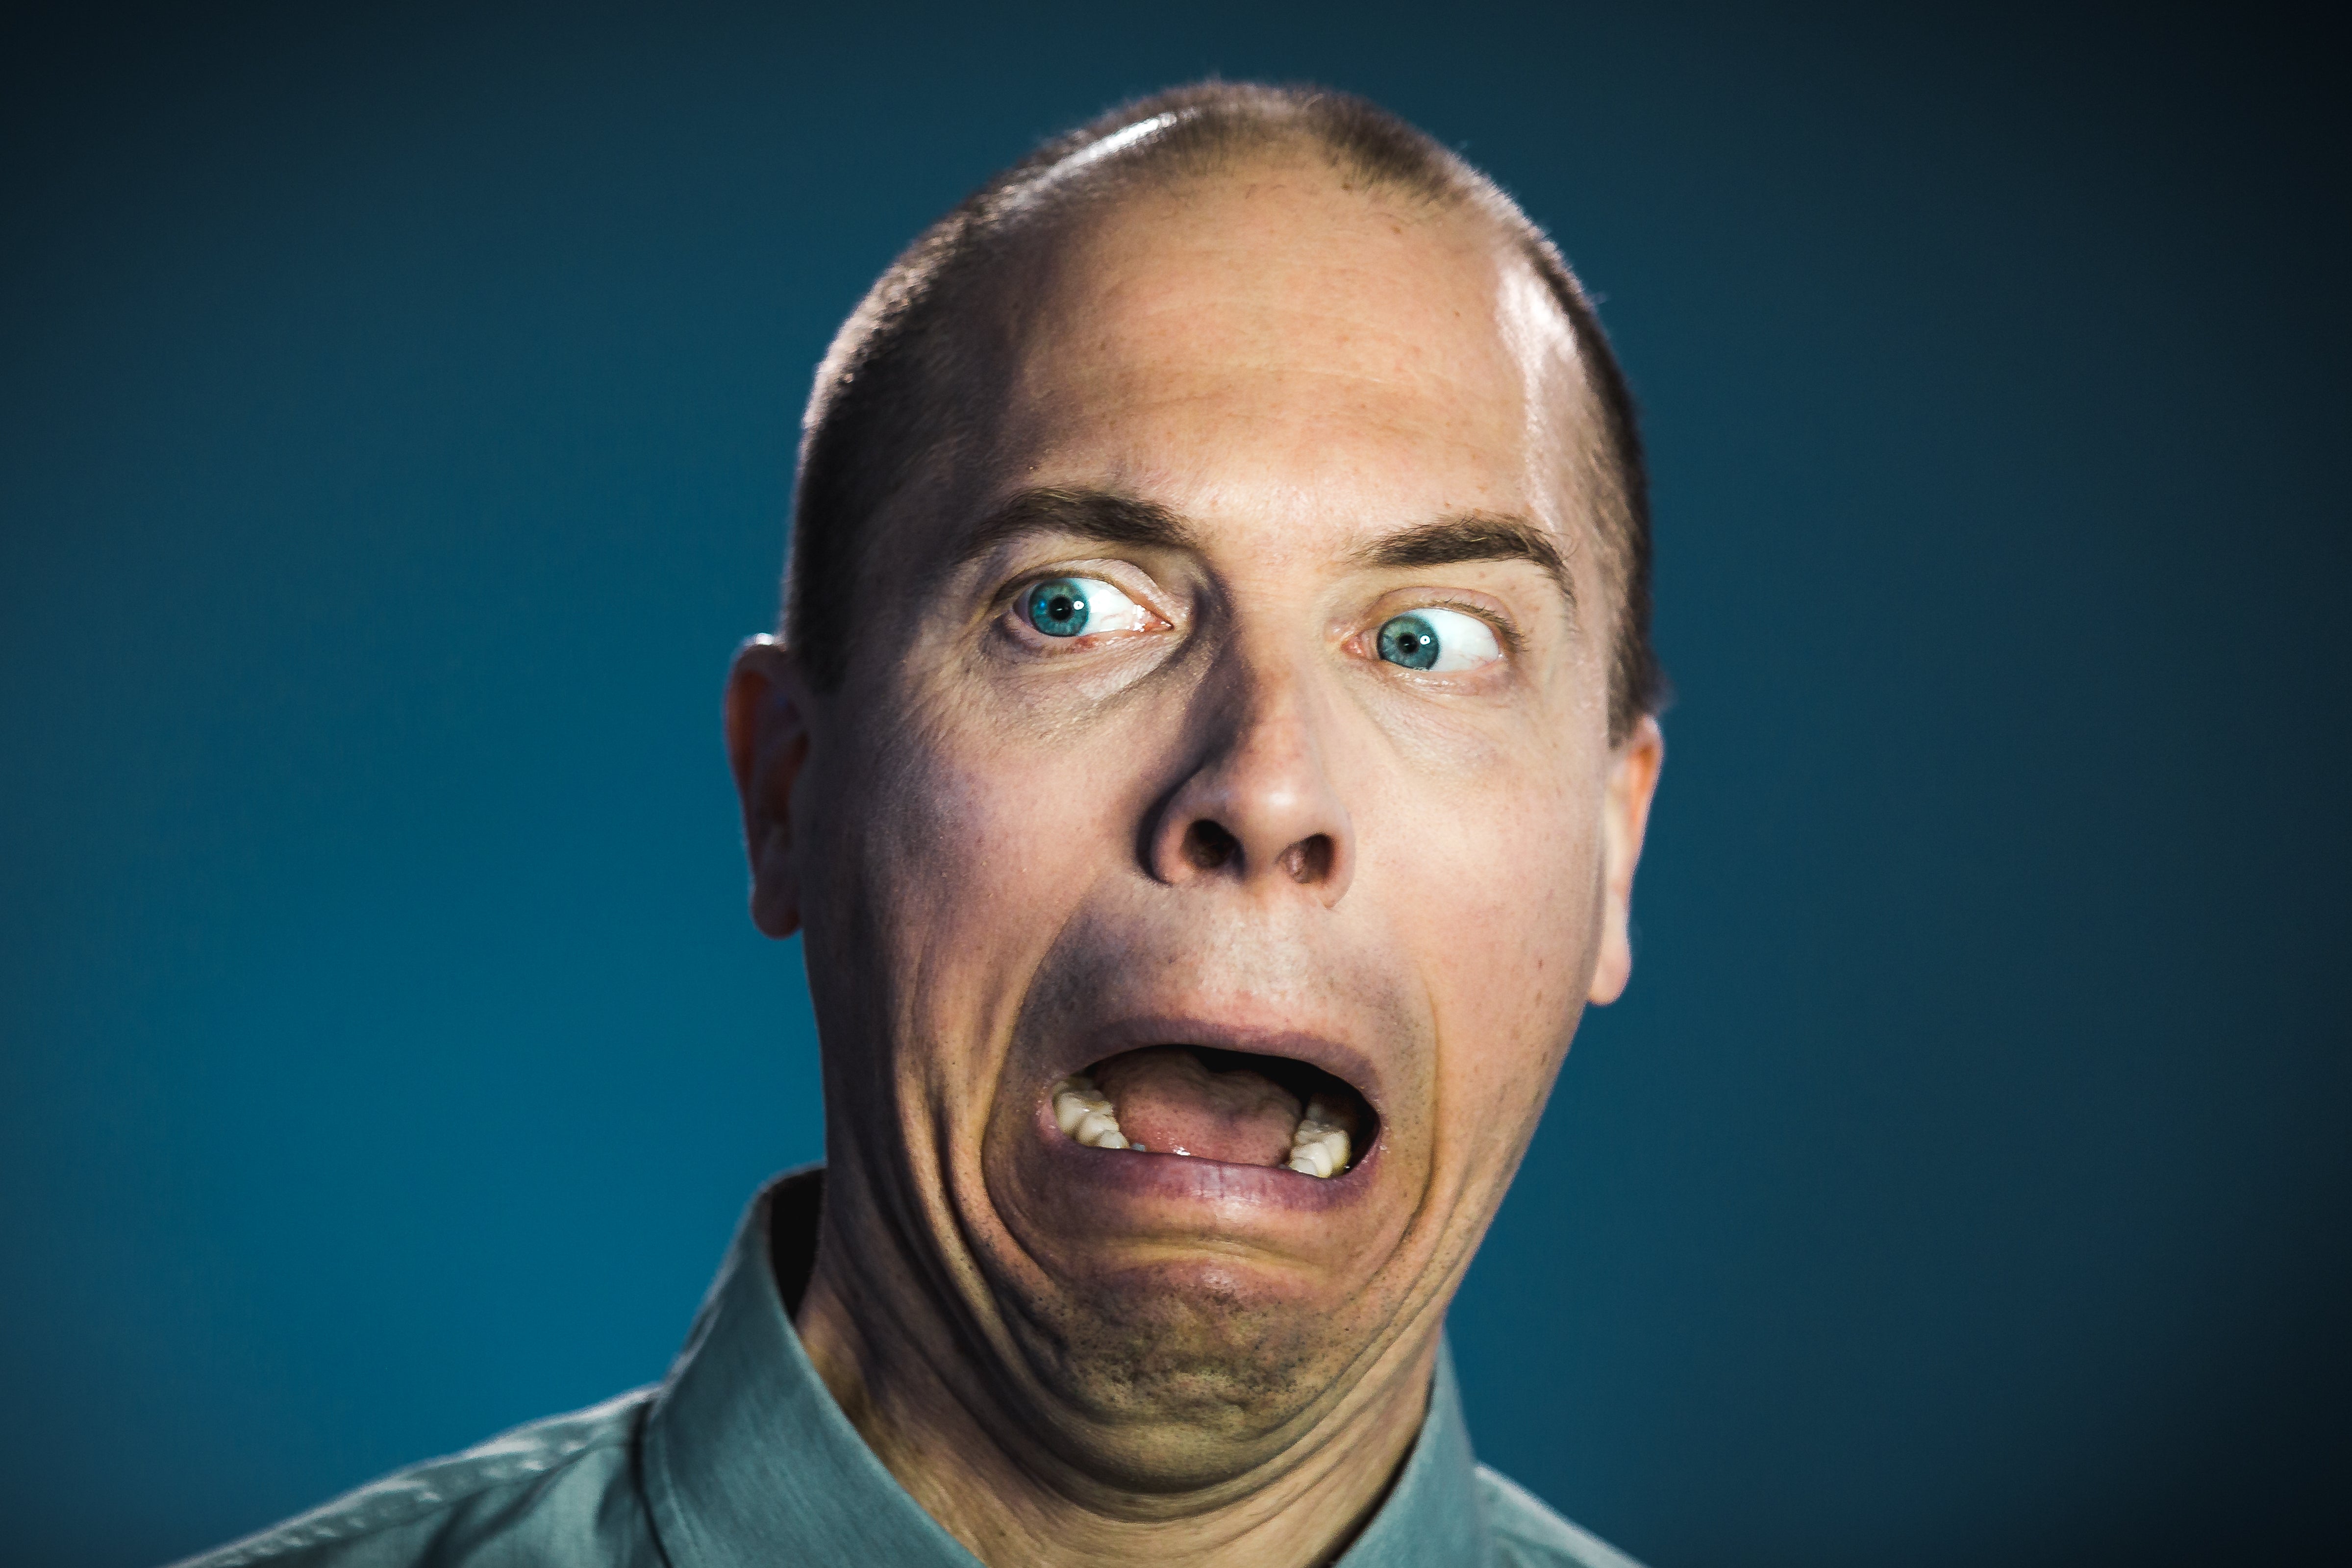 Man Screaming And Looking Terrified Stock Photo - Download Image